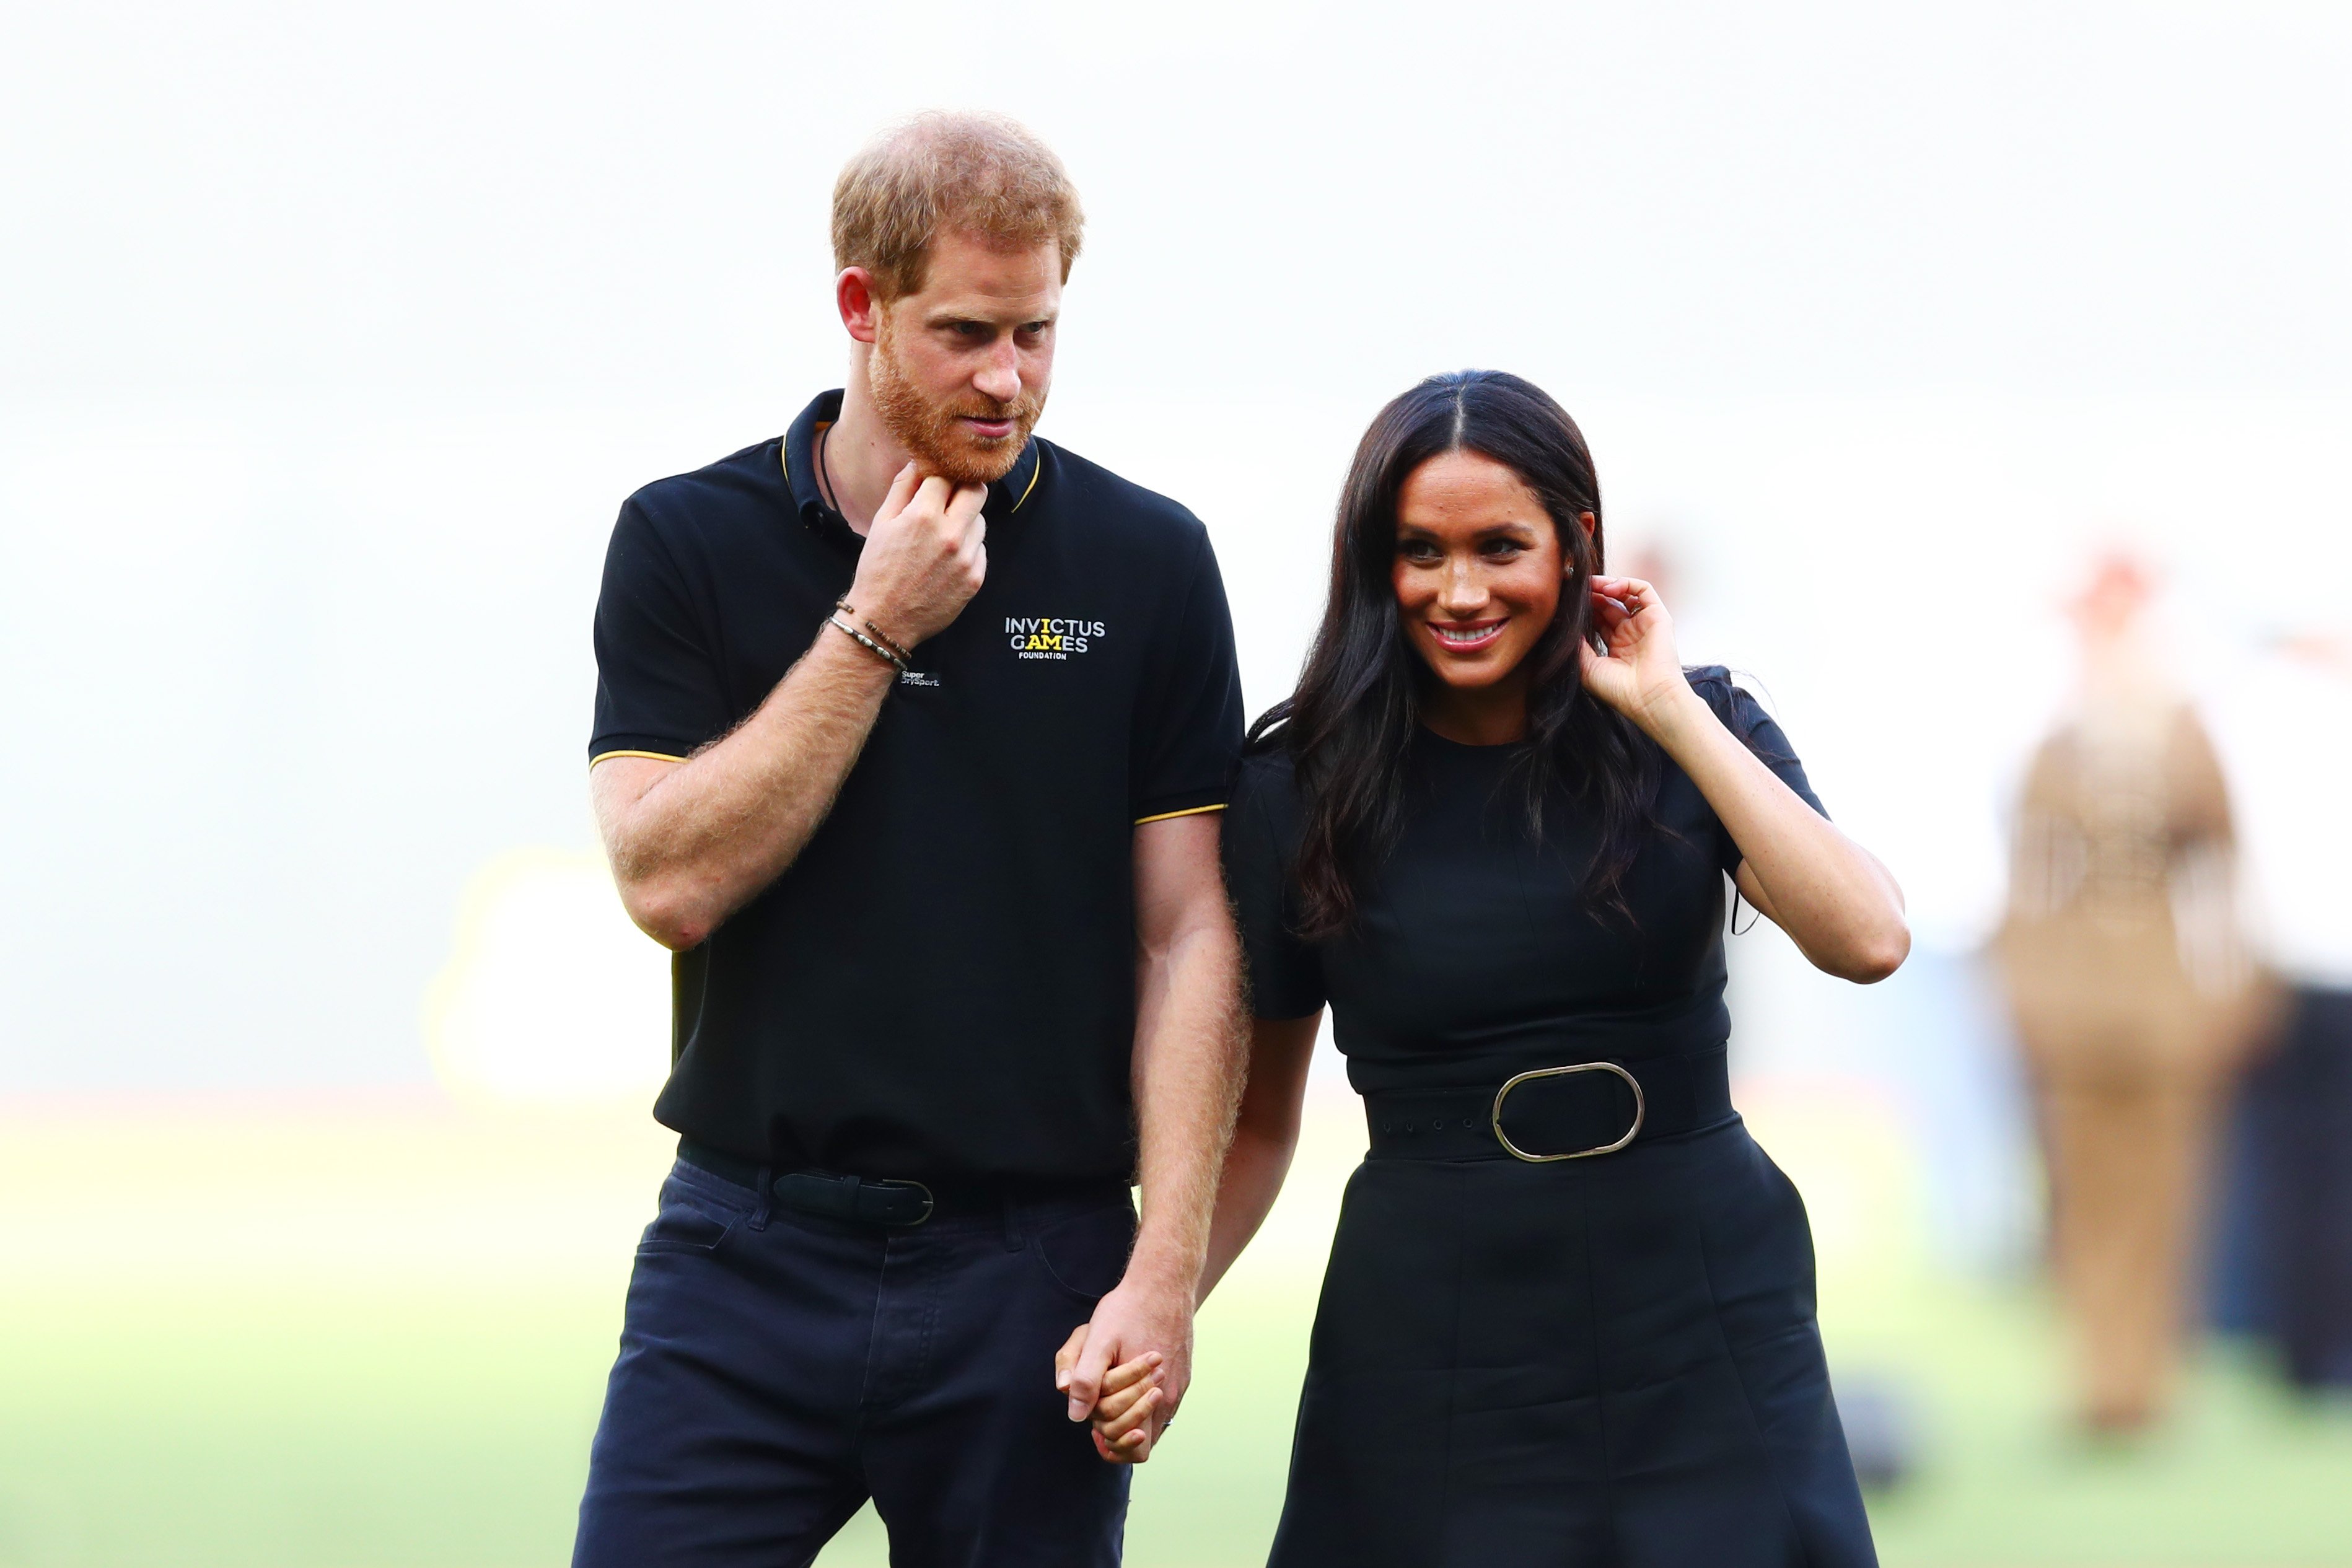 Prince Harry and Meghan Markle attend the Invictus Games baseball event on June 29, 2019 at the Queen Elizabeth Olympic Park | Photo: Getty images